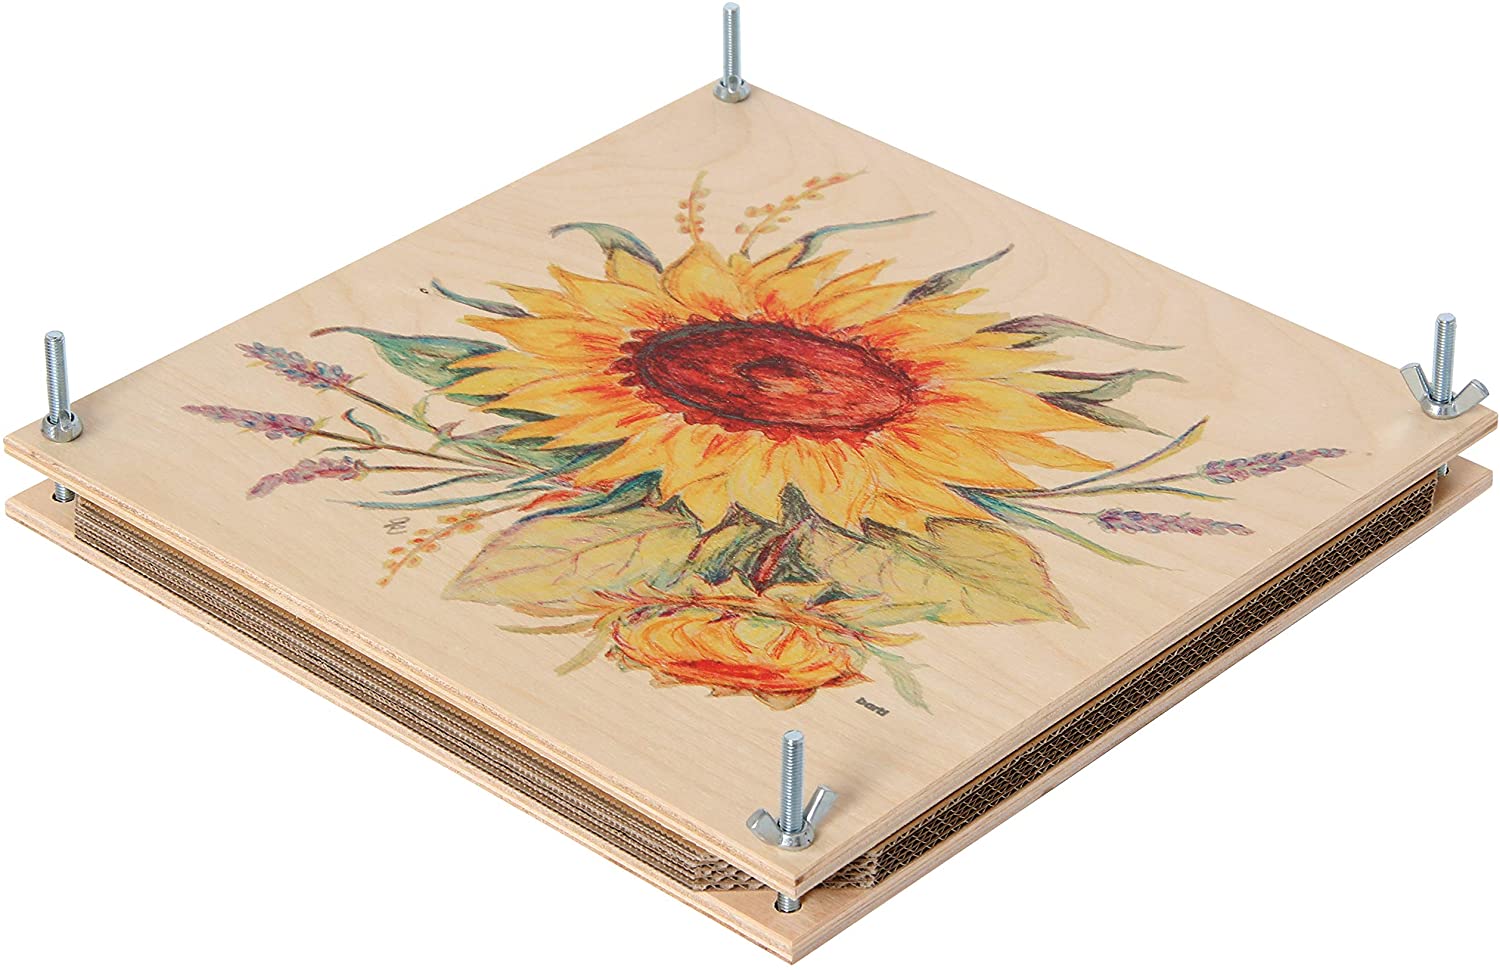 Bartl 111558 Giant Flower Press 30 x 30 cm made from wood